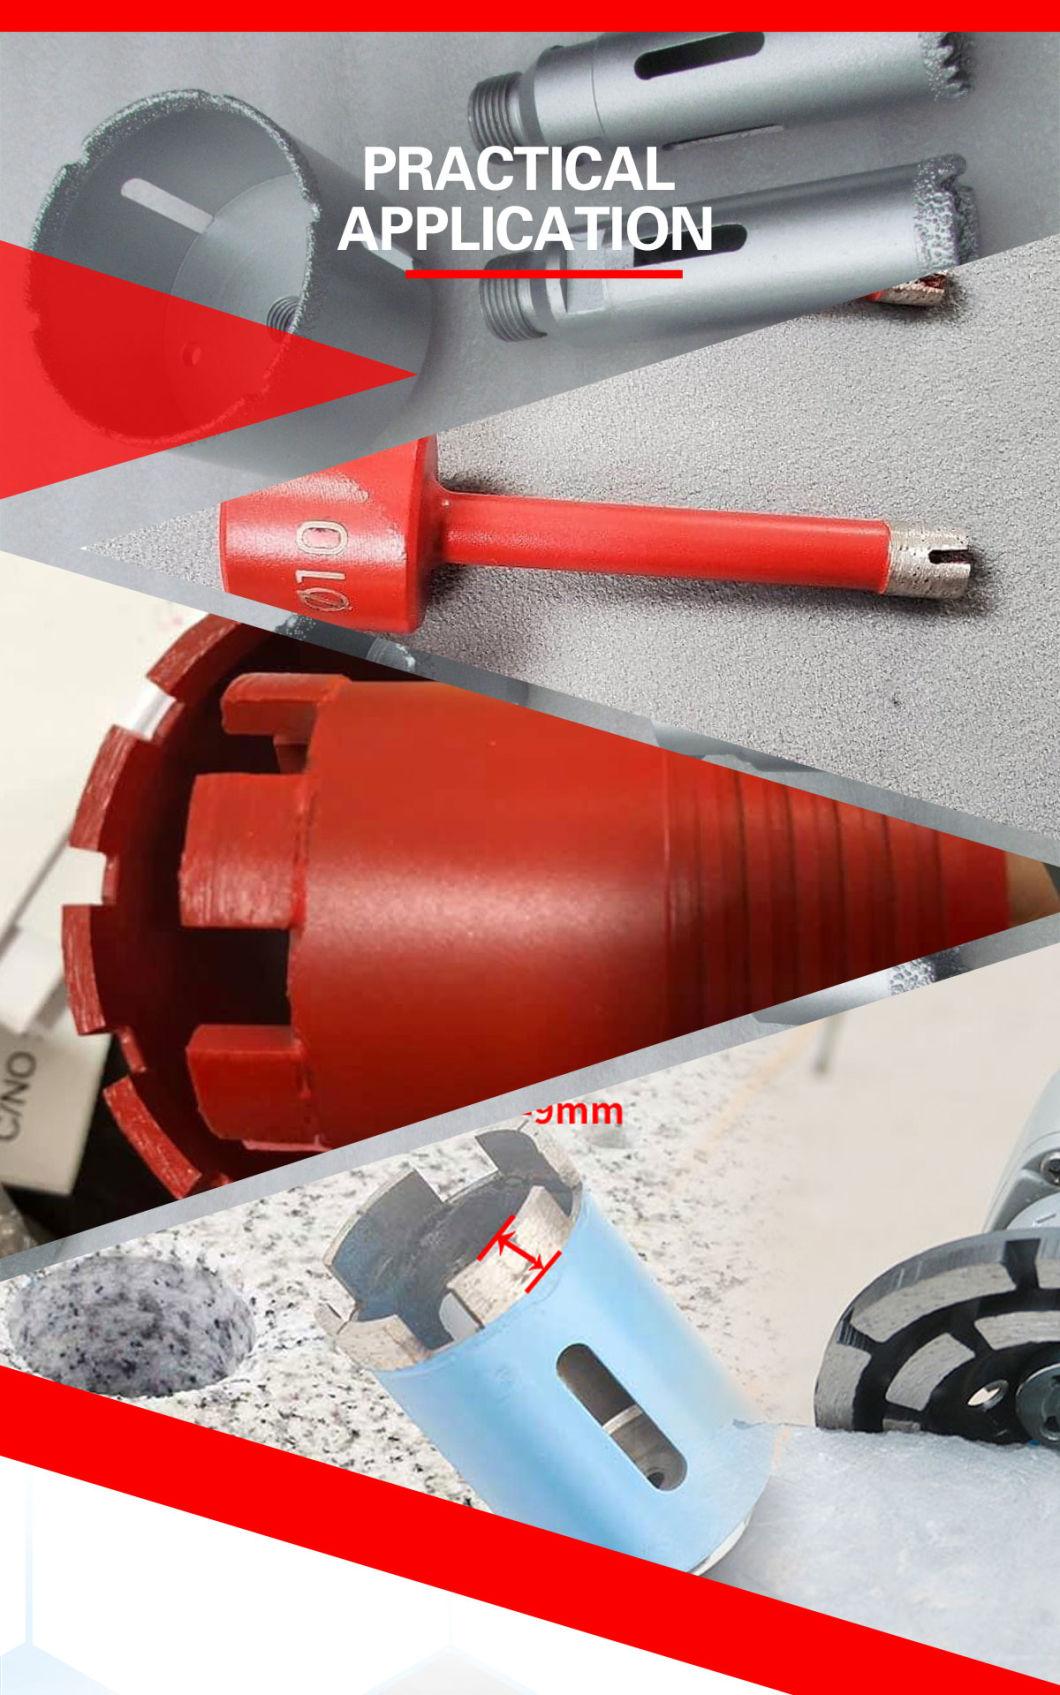 Small Block High Efficiency Large Core Drill Bits for Reinforced Concrete Drilling